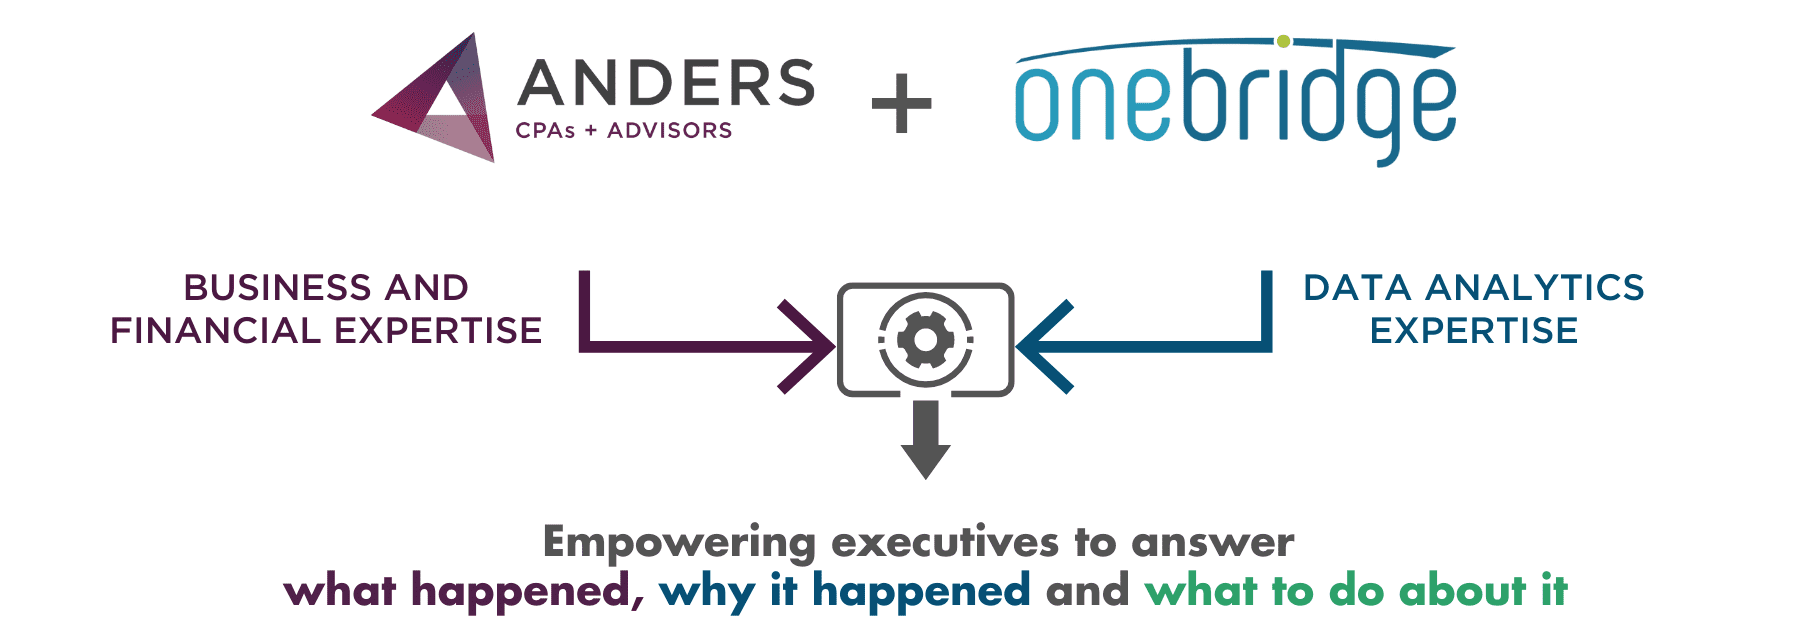 Anders Business and Financial Expertise and Onebridge Data Analytics Expertise